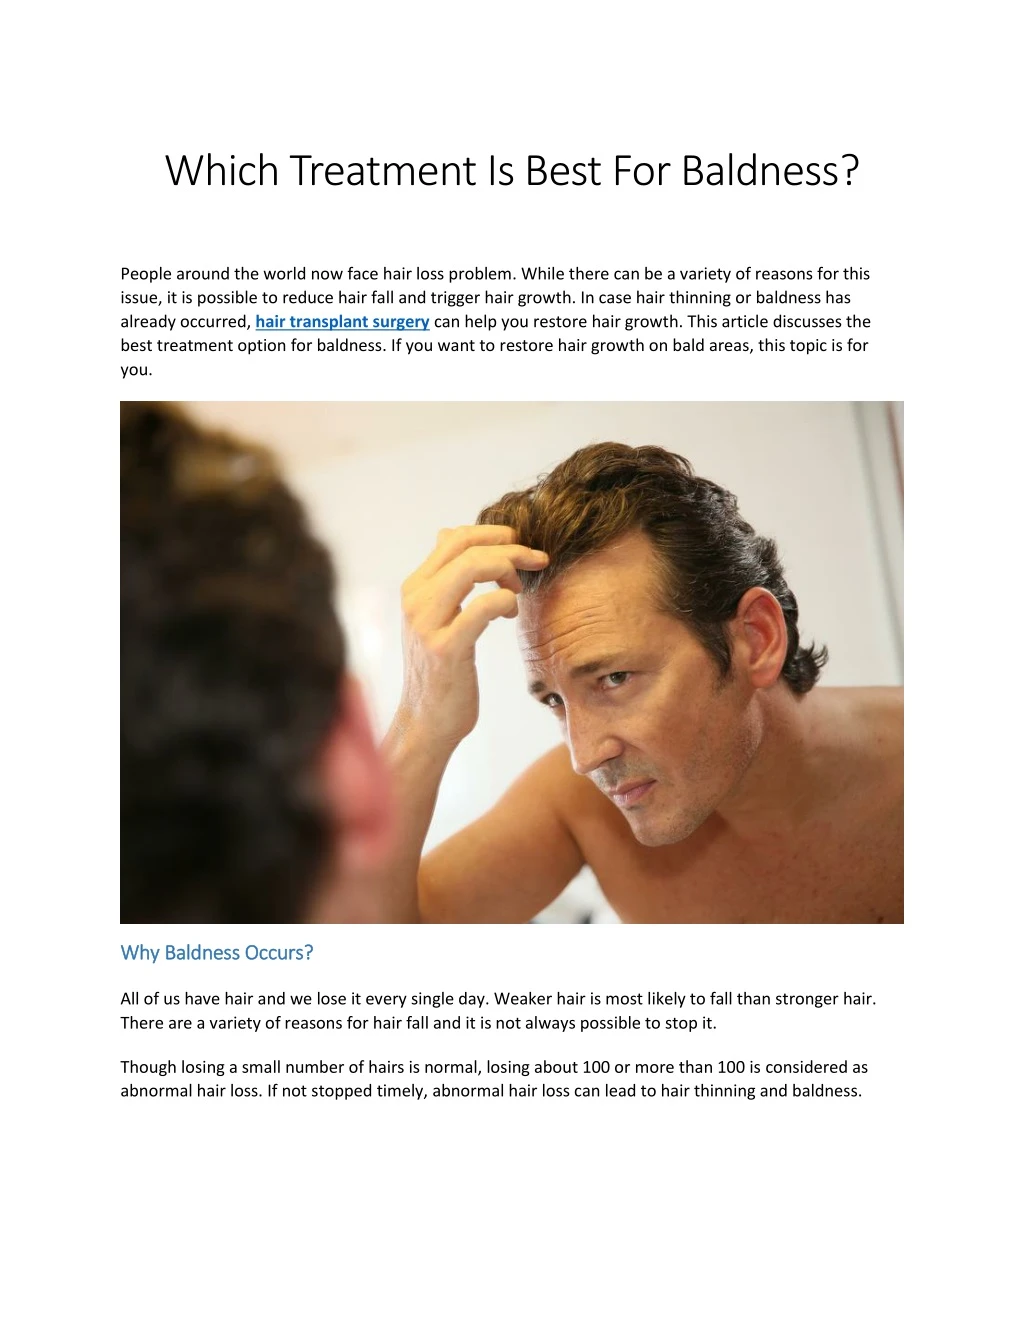 which treatment is best for baldness